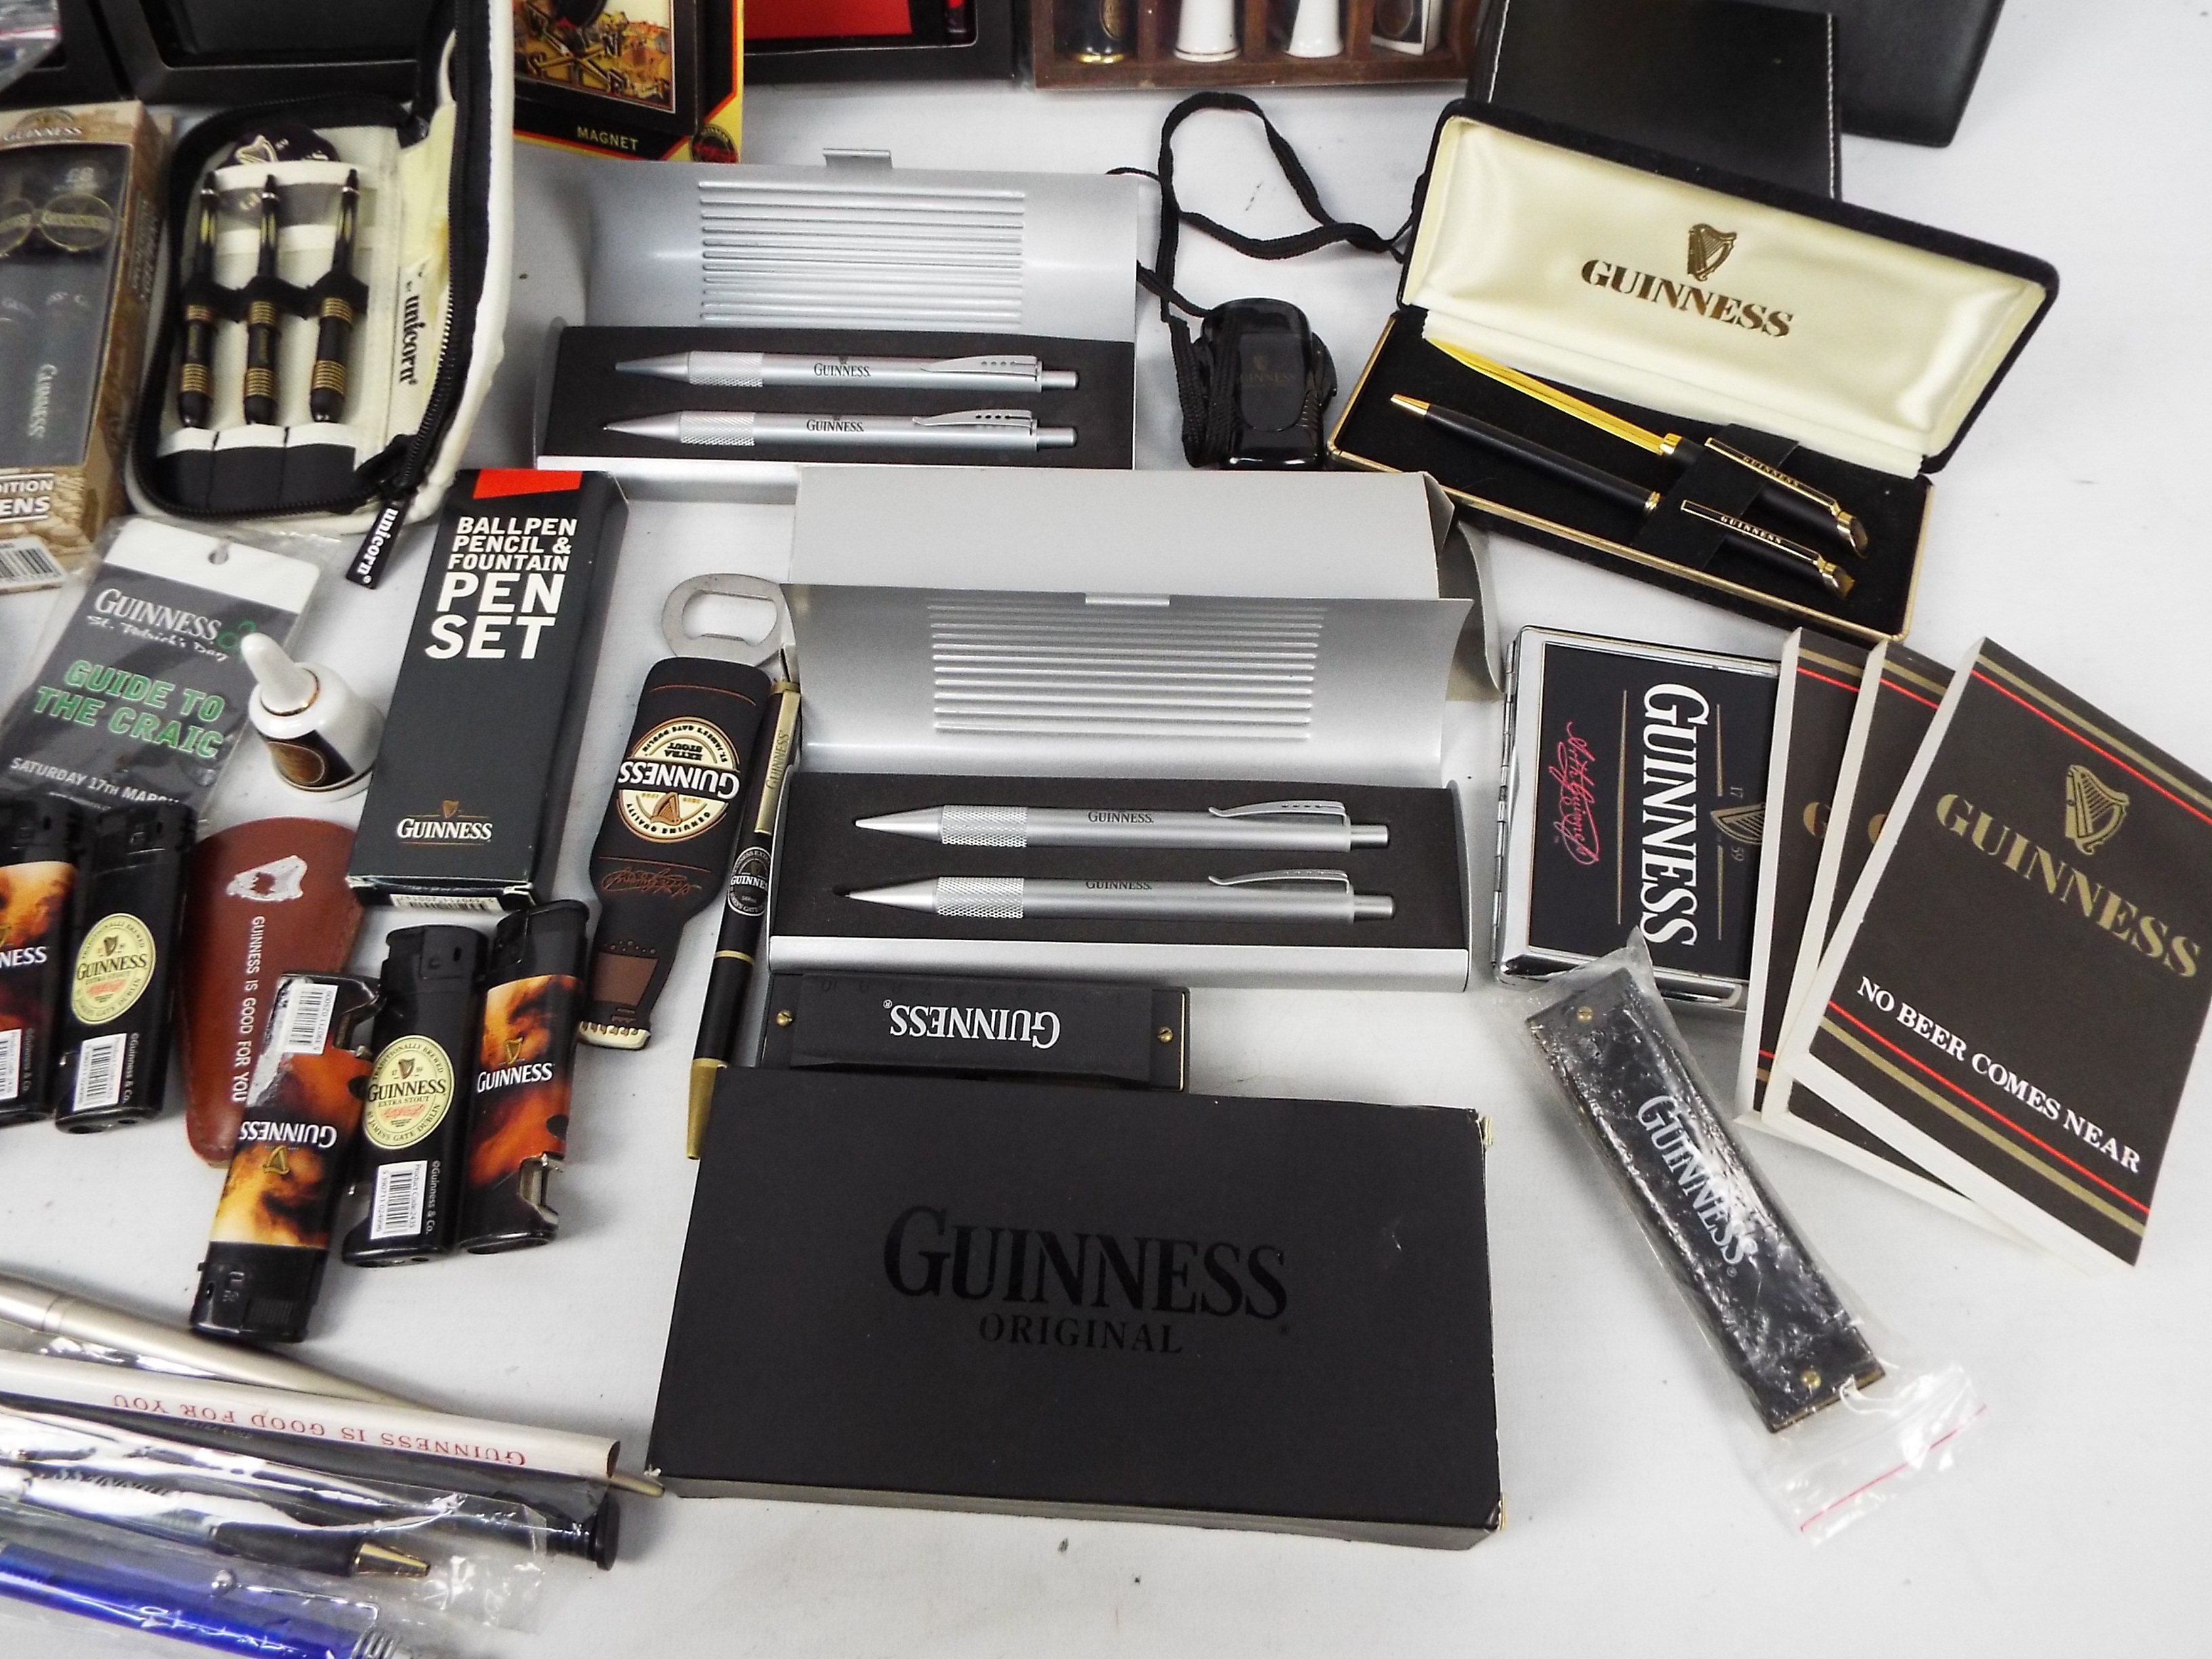 Guinness - Mixed Guinness branded collectables to include pens / pen sets, cufflinks, thimbles, - Image 5 of 5